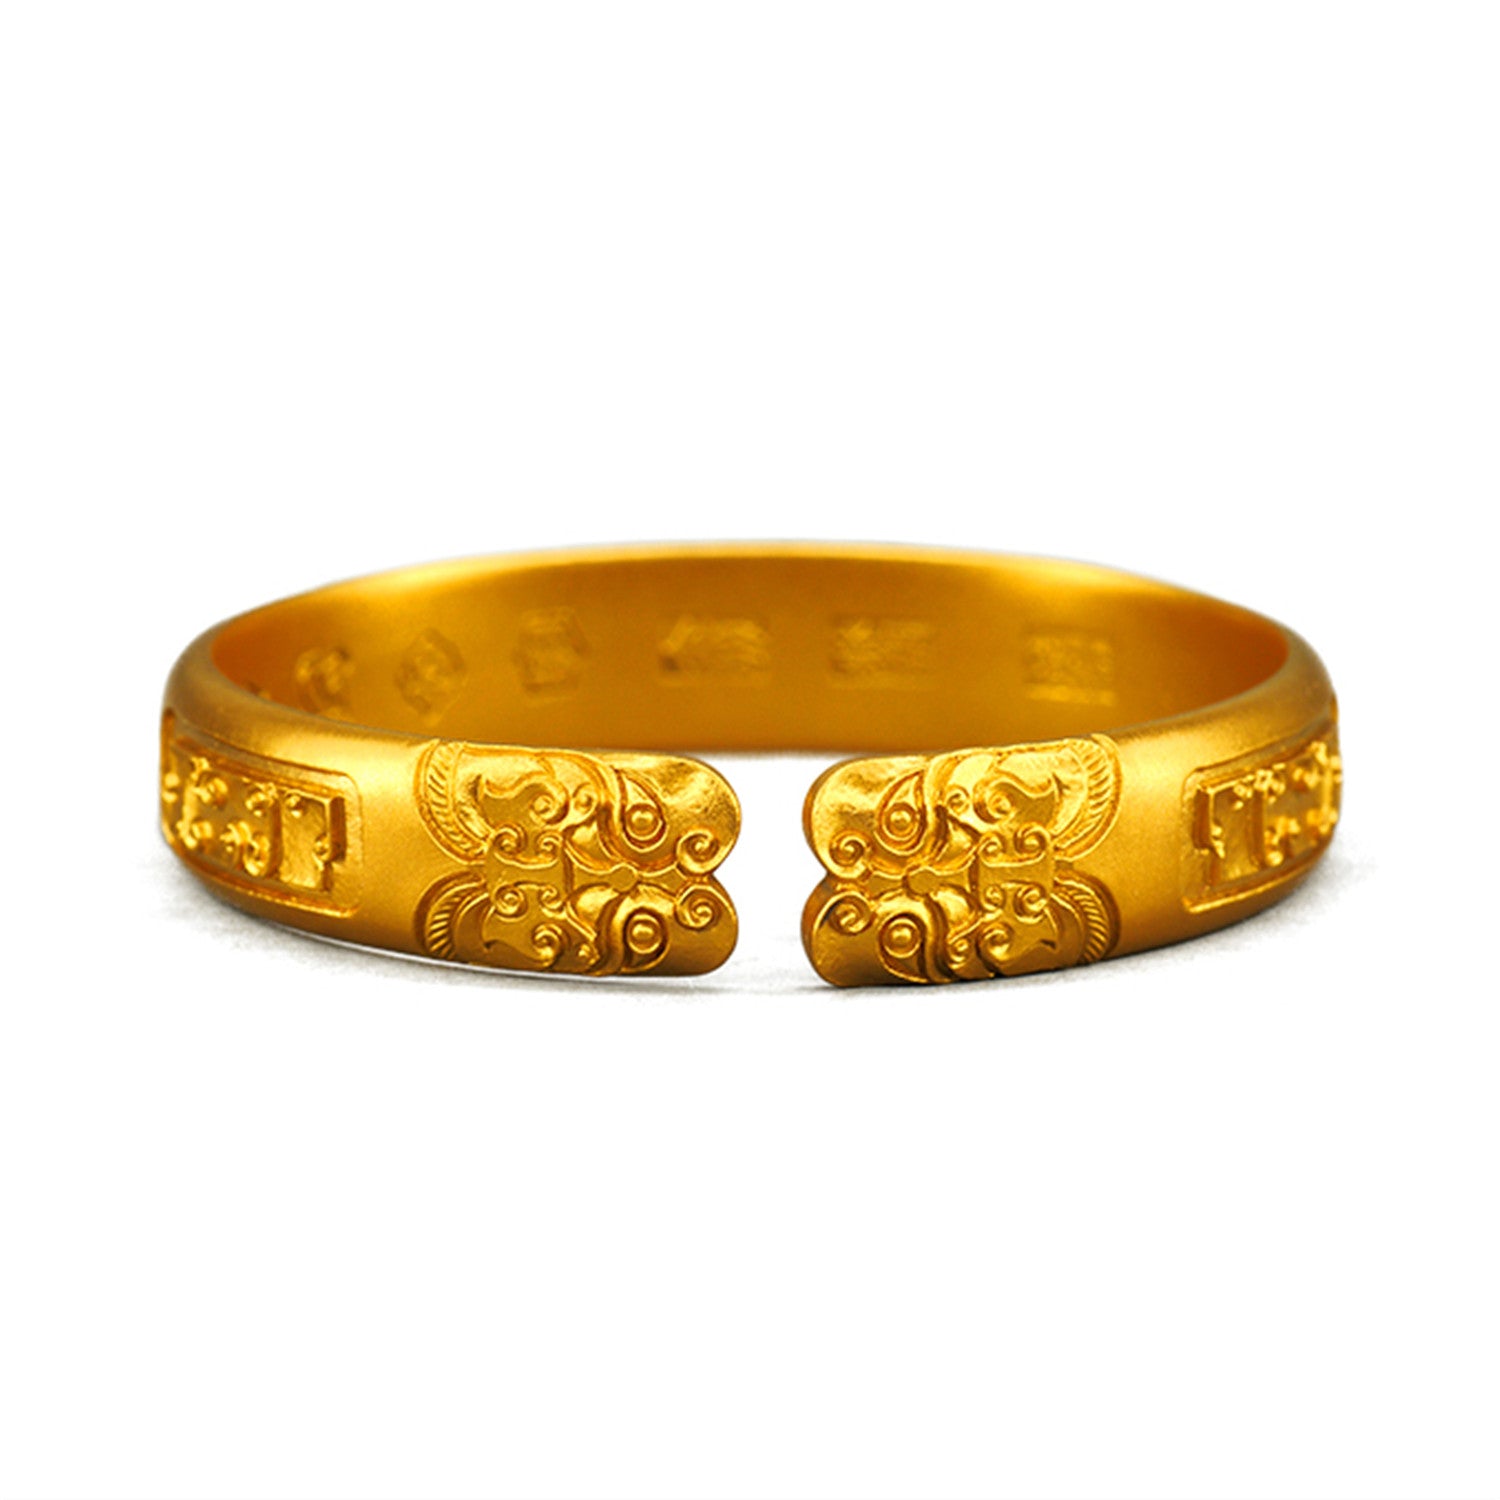 EVECOCO Full Gold Bracelet For Man,Animal Pattern And Cloud Pattern,Hand Forging,Micro Relief,85g